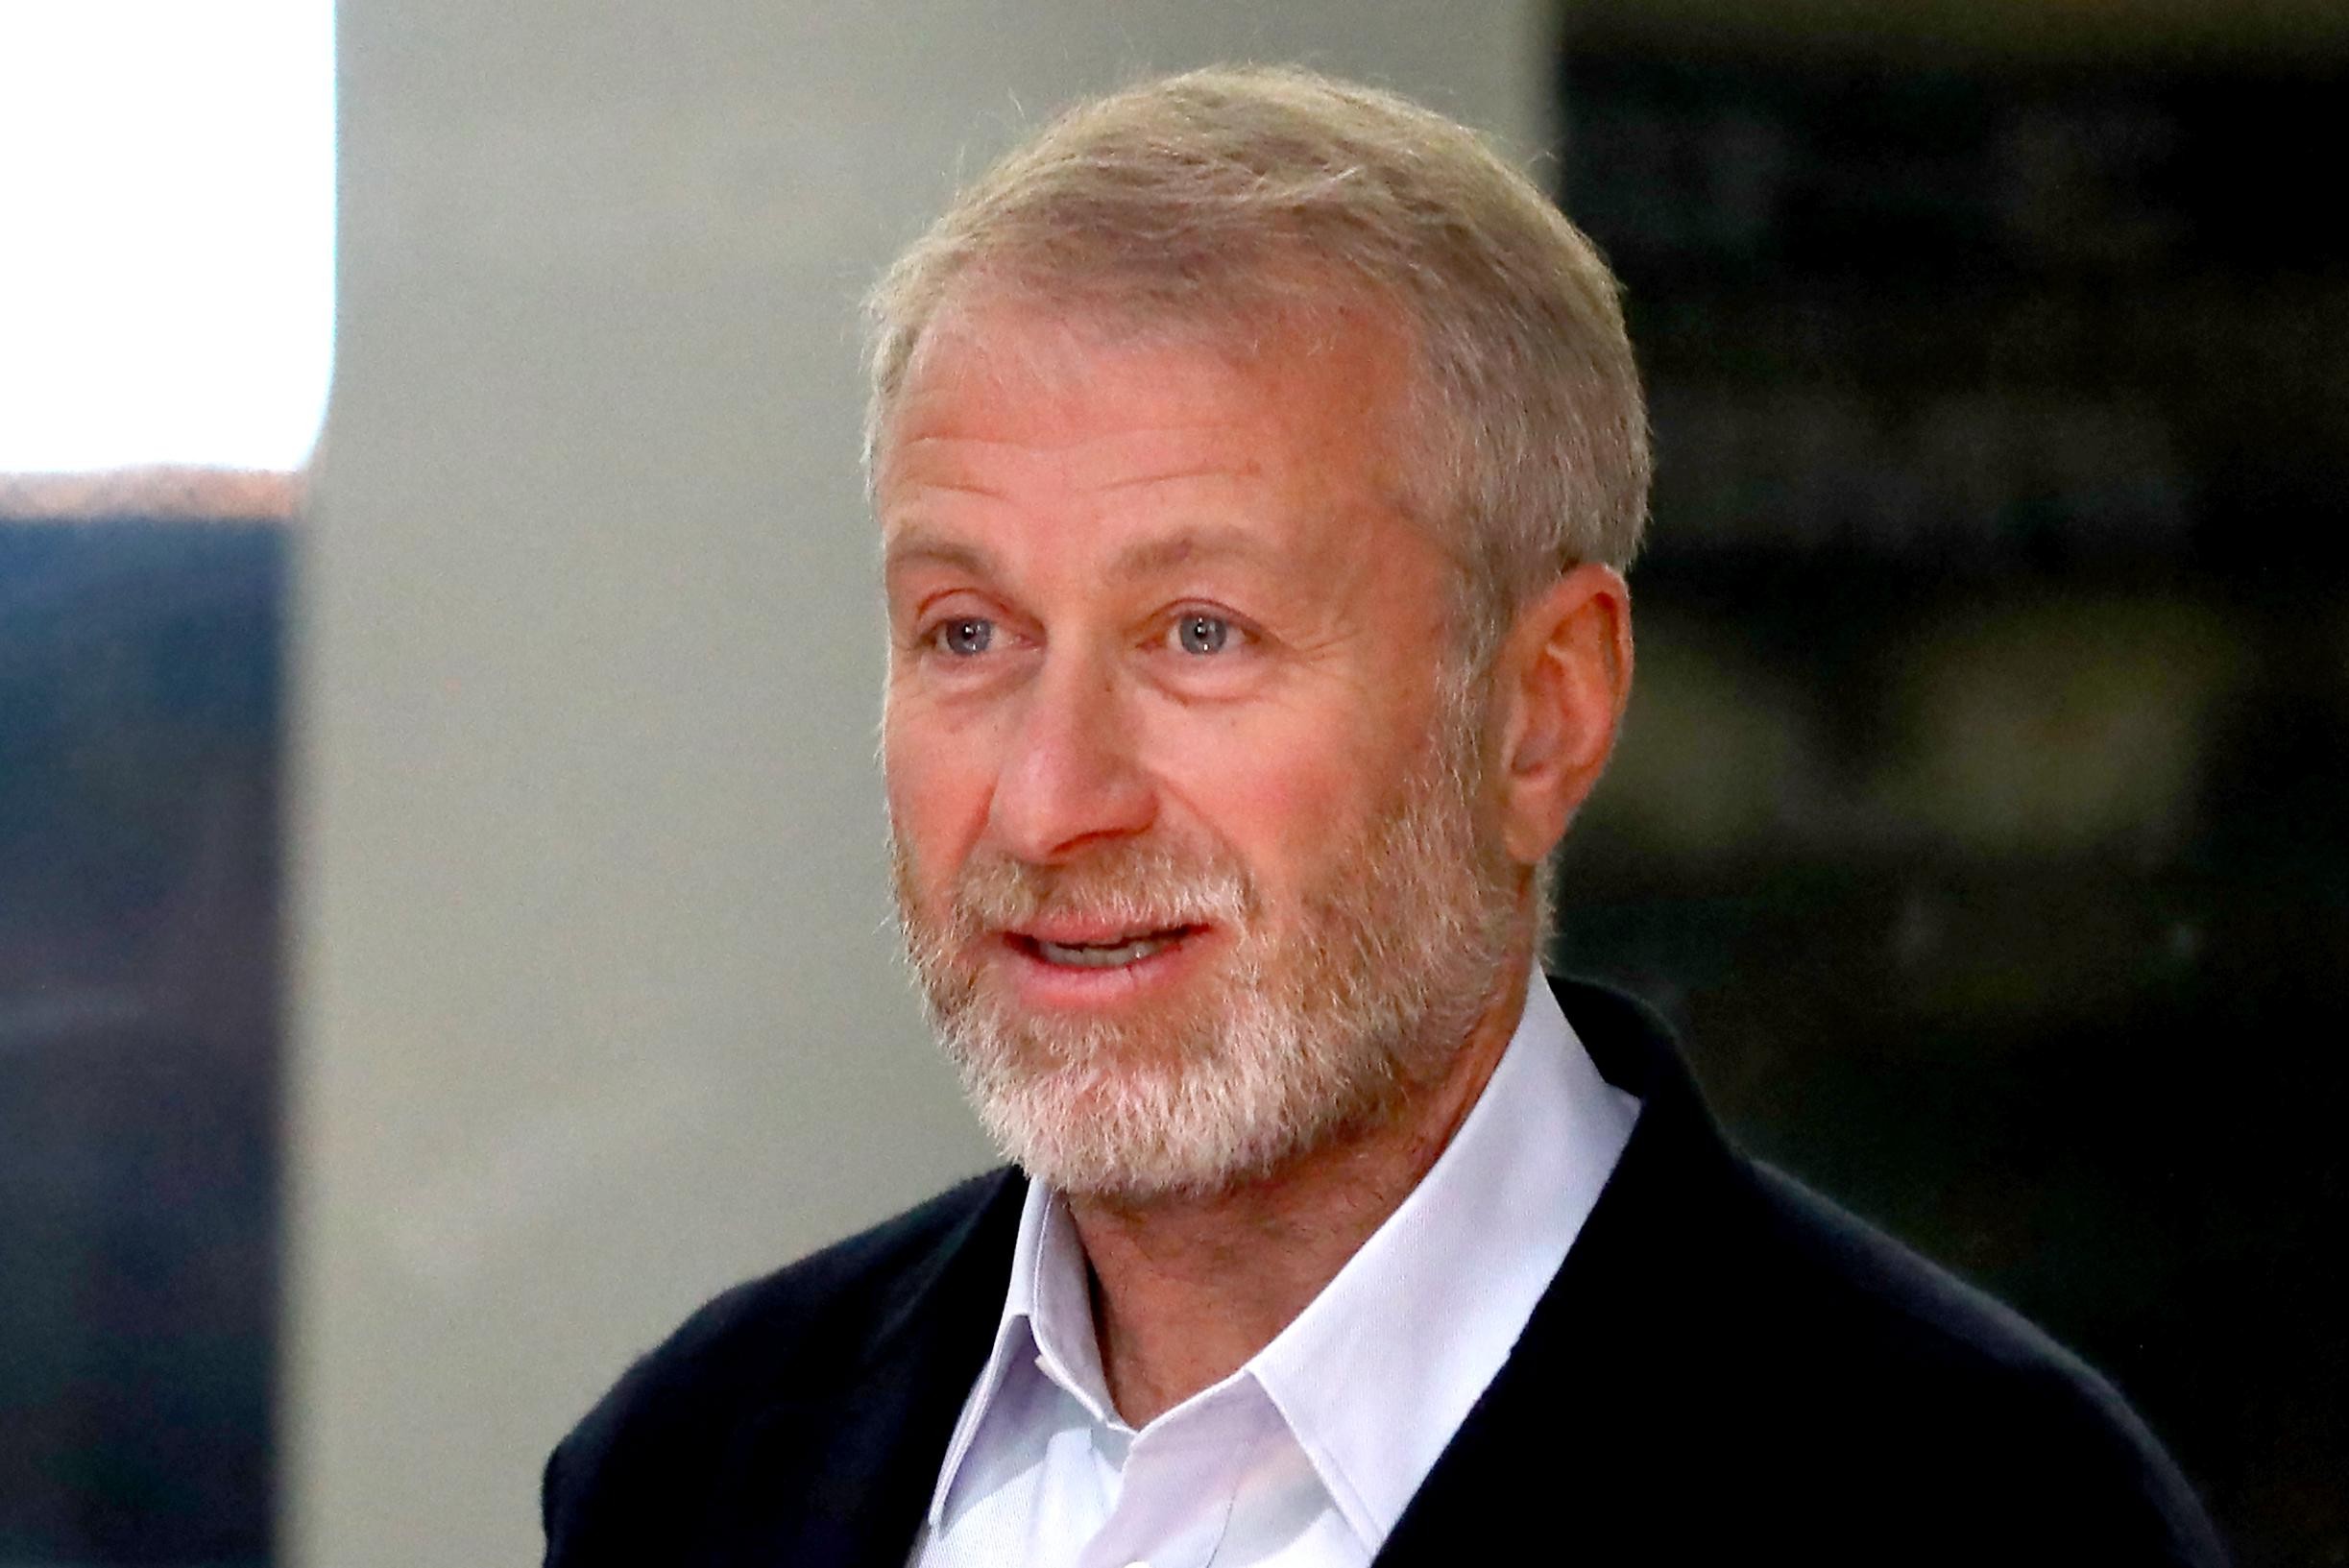 Chelsea’s Russian owner Roman Abramovich ‘banned from England’